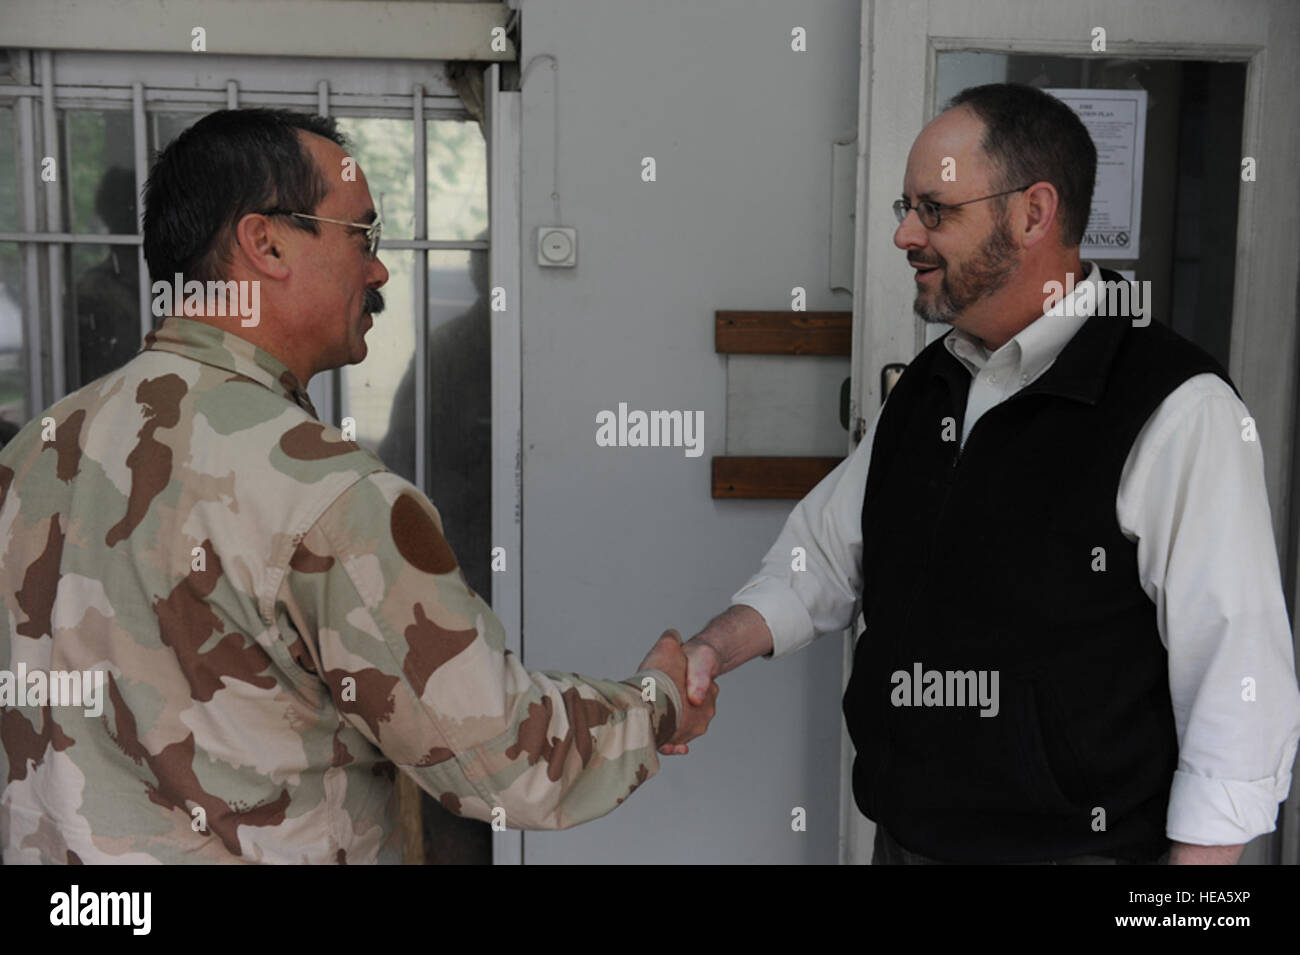 100516-F-5561D-001 Kabul - Hungarian Chief of Staff Gen. Laszlo Tombol meets Dr. Jack D. Kem, Deputy to the Commander, NATO Training Mission - Afghanistan (NTM-A) / Combined Security Transition Command - Afghanistan (CSTC-A) at Camp Eggers on May 16, 2010. Gen. Tombol visited Camp Eggers to attend an operations brief. Senior Airman Matt Davis) Stock Photo